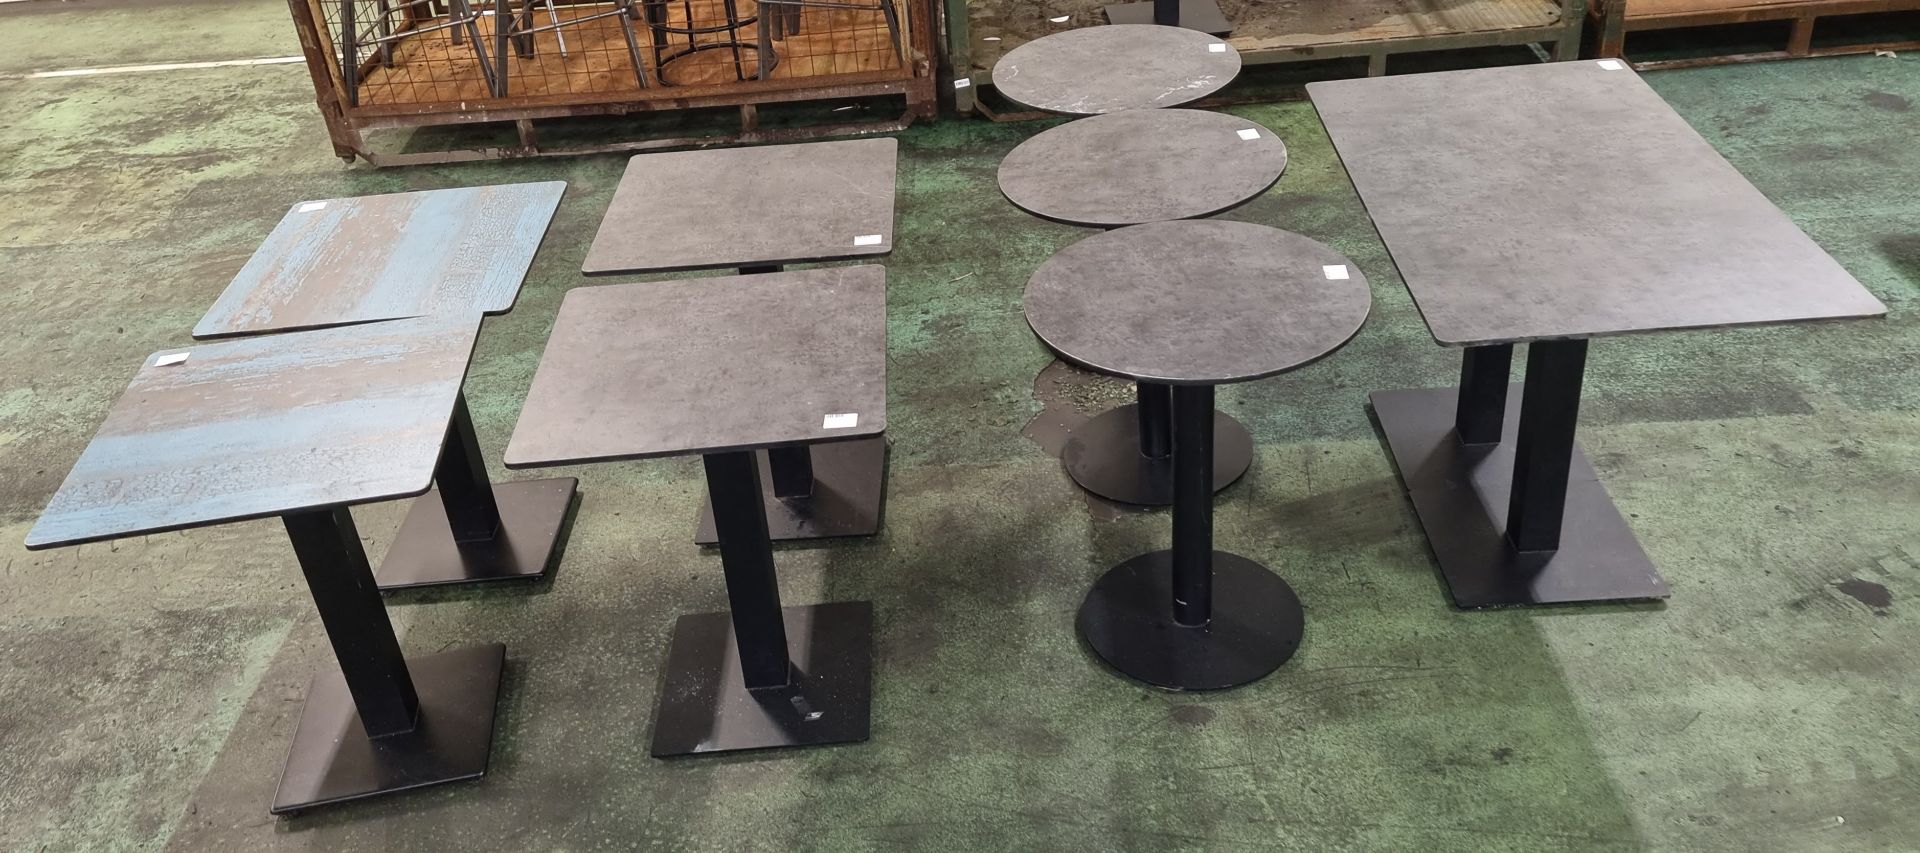 11x Extrema tables - see description for details